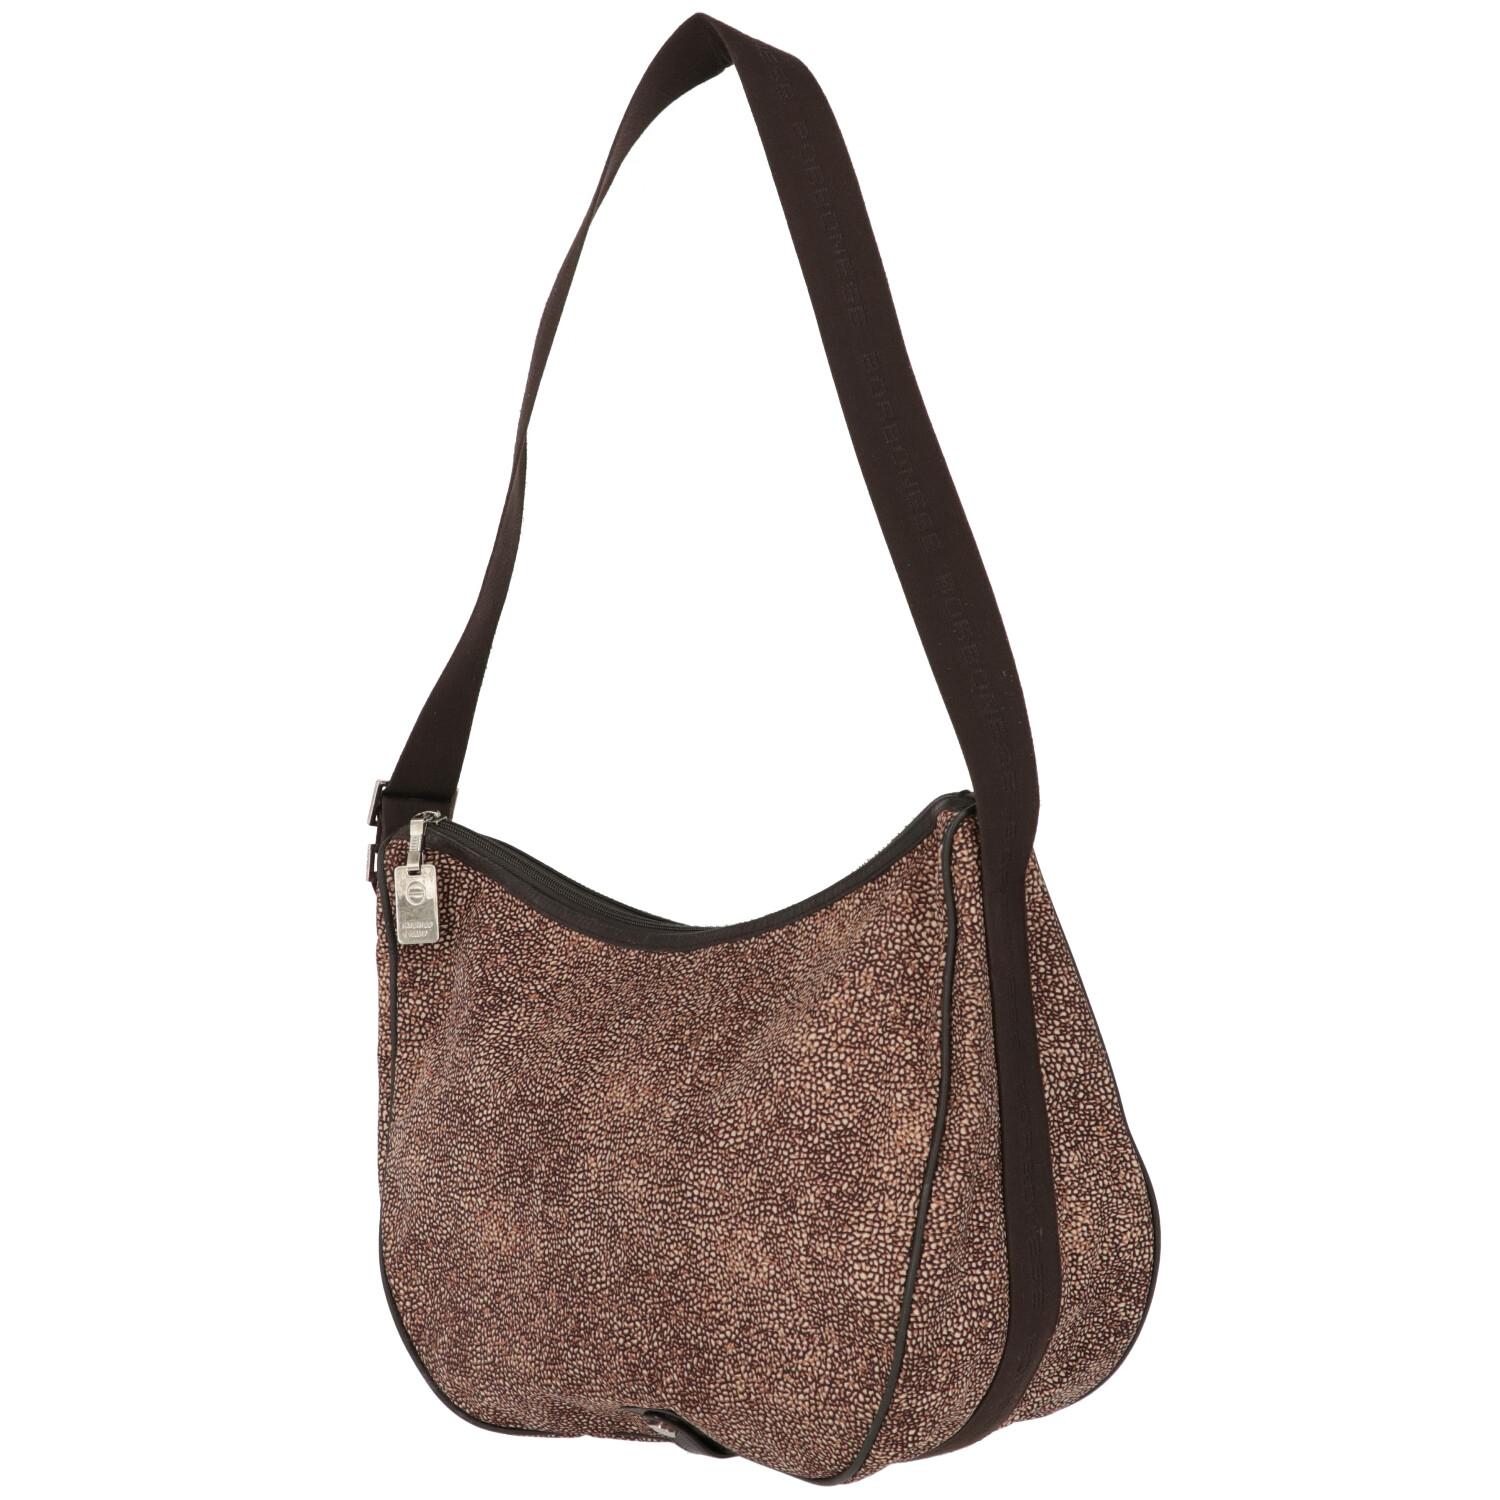 A.N.G.E.L.O. Vintage - ITALY
Borbonese brown fabric with jet op print Luna bag and edges finished in leather. Logoed cotton ribbon shoulder strap with self-locking buckle, zip closure and metal tie road. Inside there are two zipped cosmetic